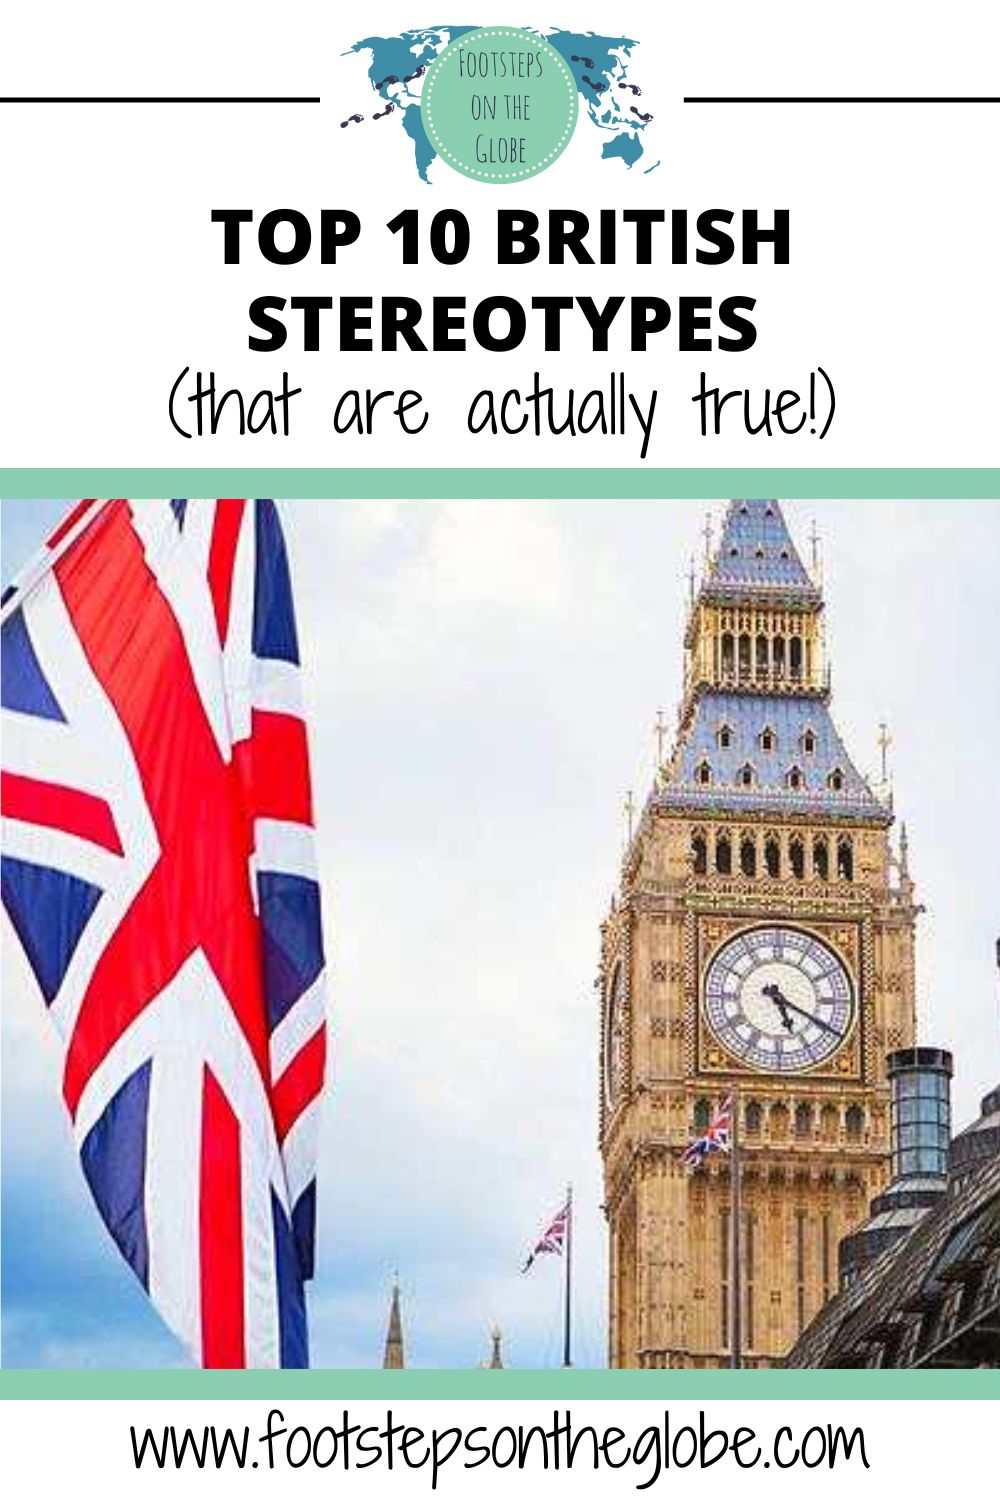 Pinterest image of Big Ben in London with a Union Jack next to it with the text: "Top 10 British stereotypes that are actually true"